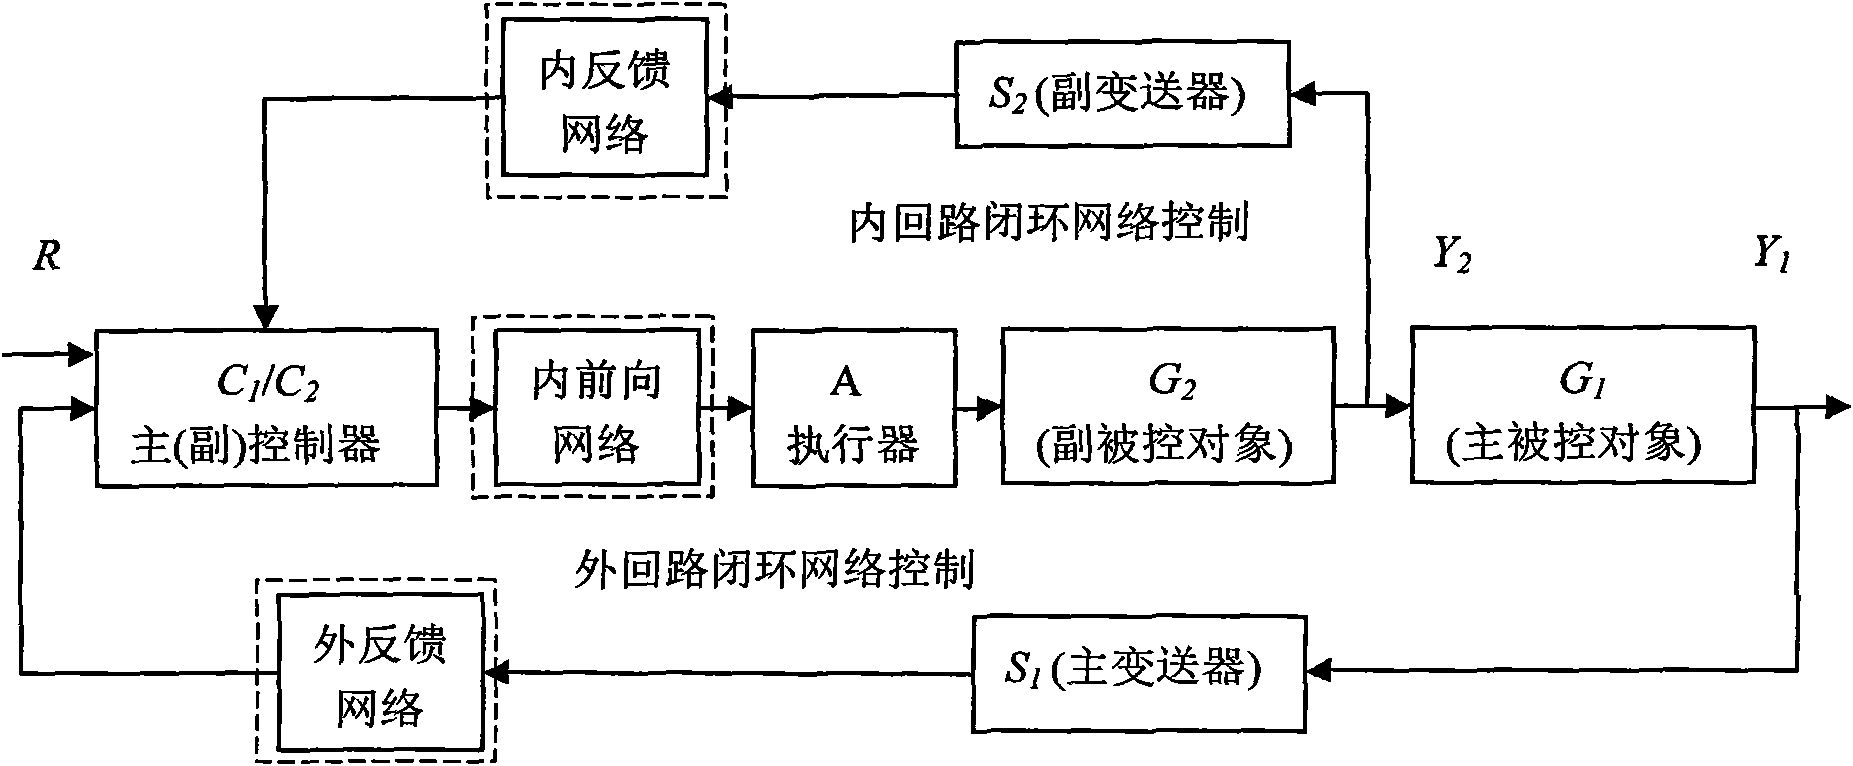 Compensation method for external feedback and internal loop randomness network time delay of network cascade control system